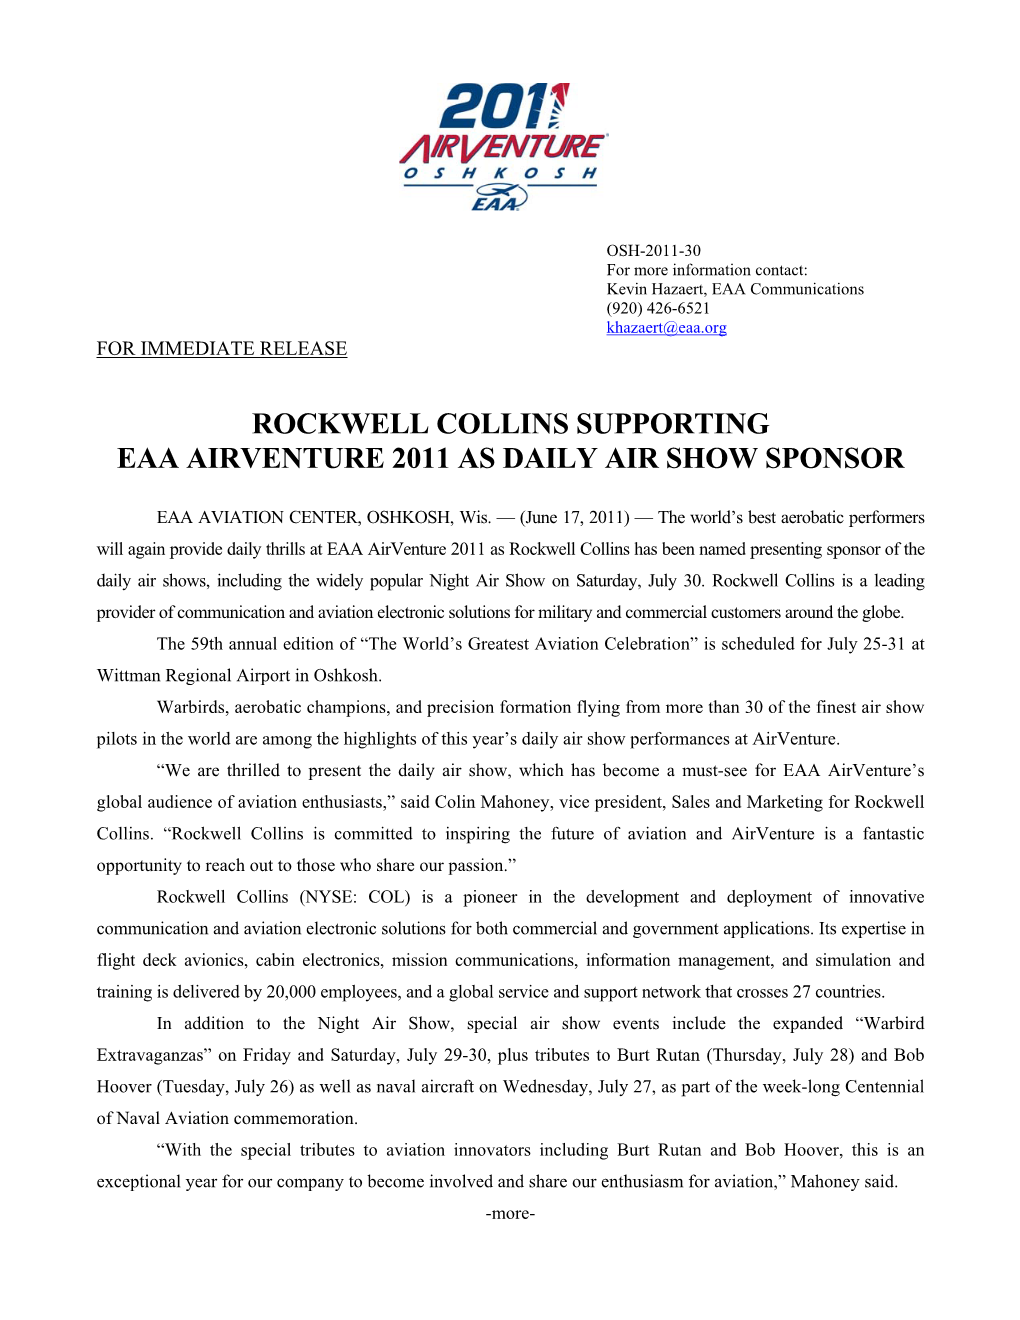 Eaa/Foundation News Release